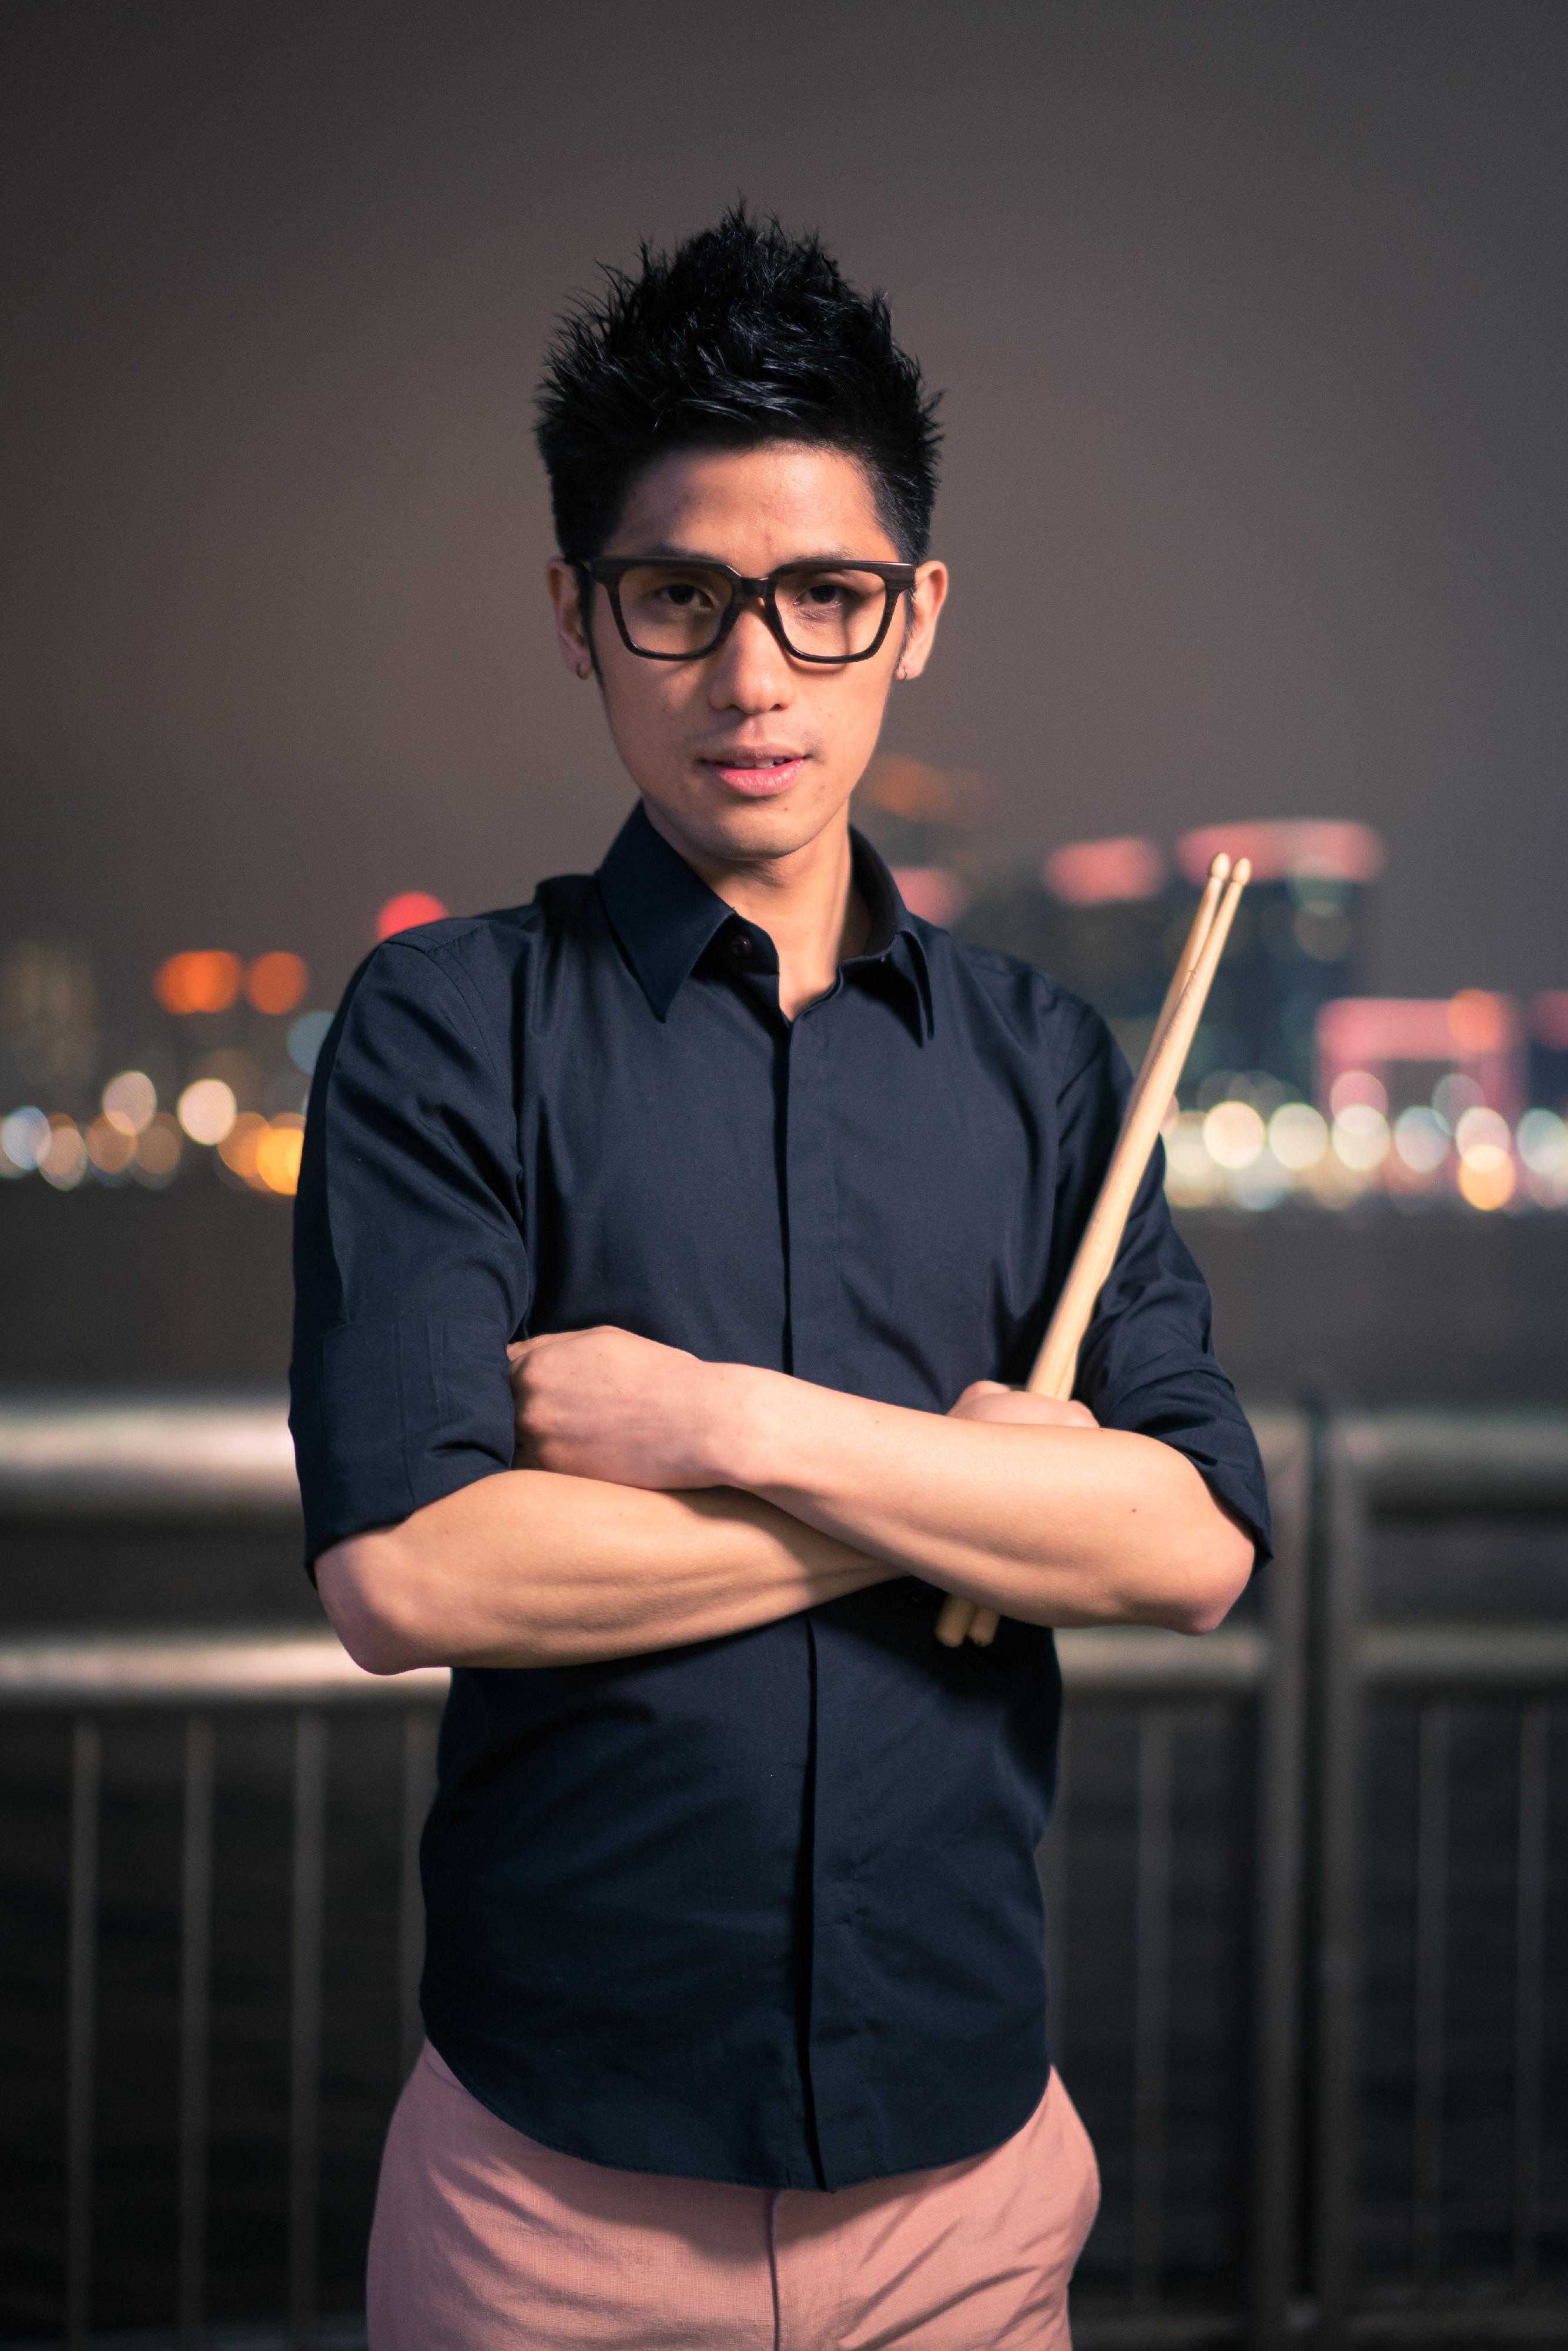 The Leisure and Cultural Services Department's "Our Music Talents" Series will present a saxophone recital by saxophonist Chemie Ching, together with pianist Cherry Tsang and drummer Nate Wong, in November. Photo shows Wong.